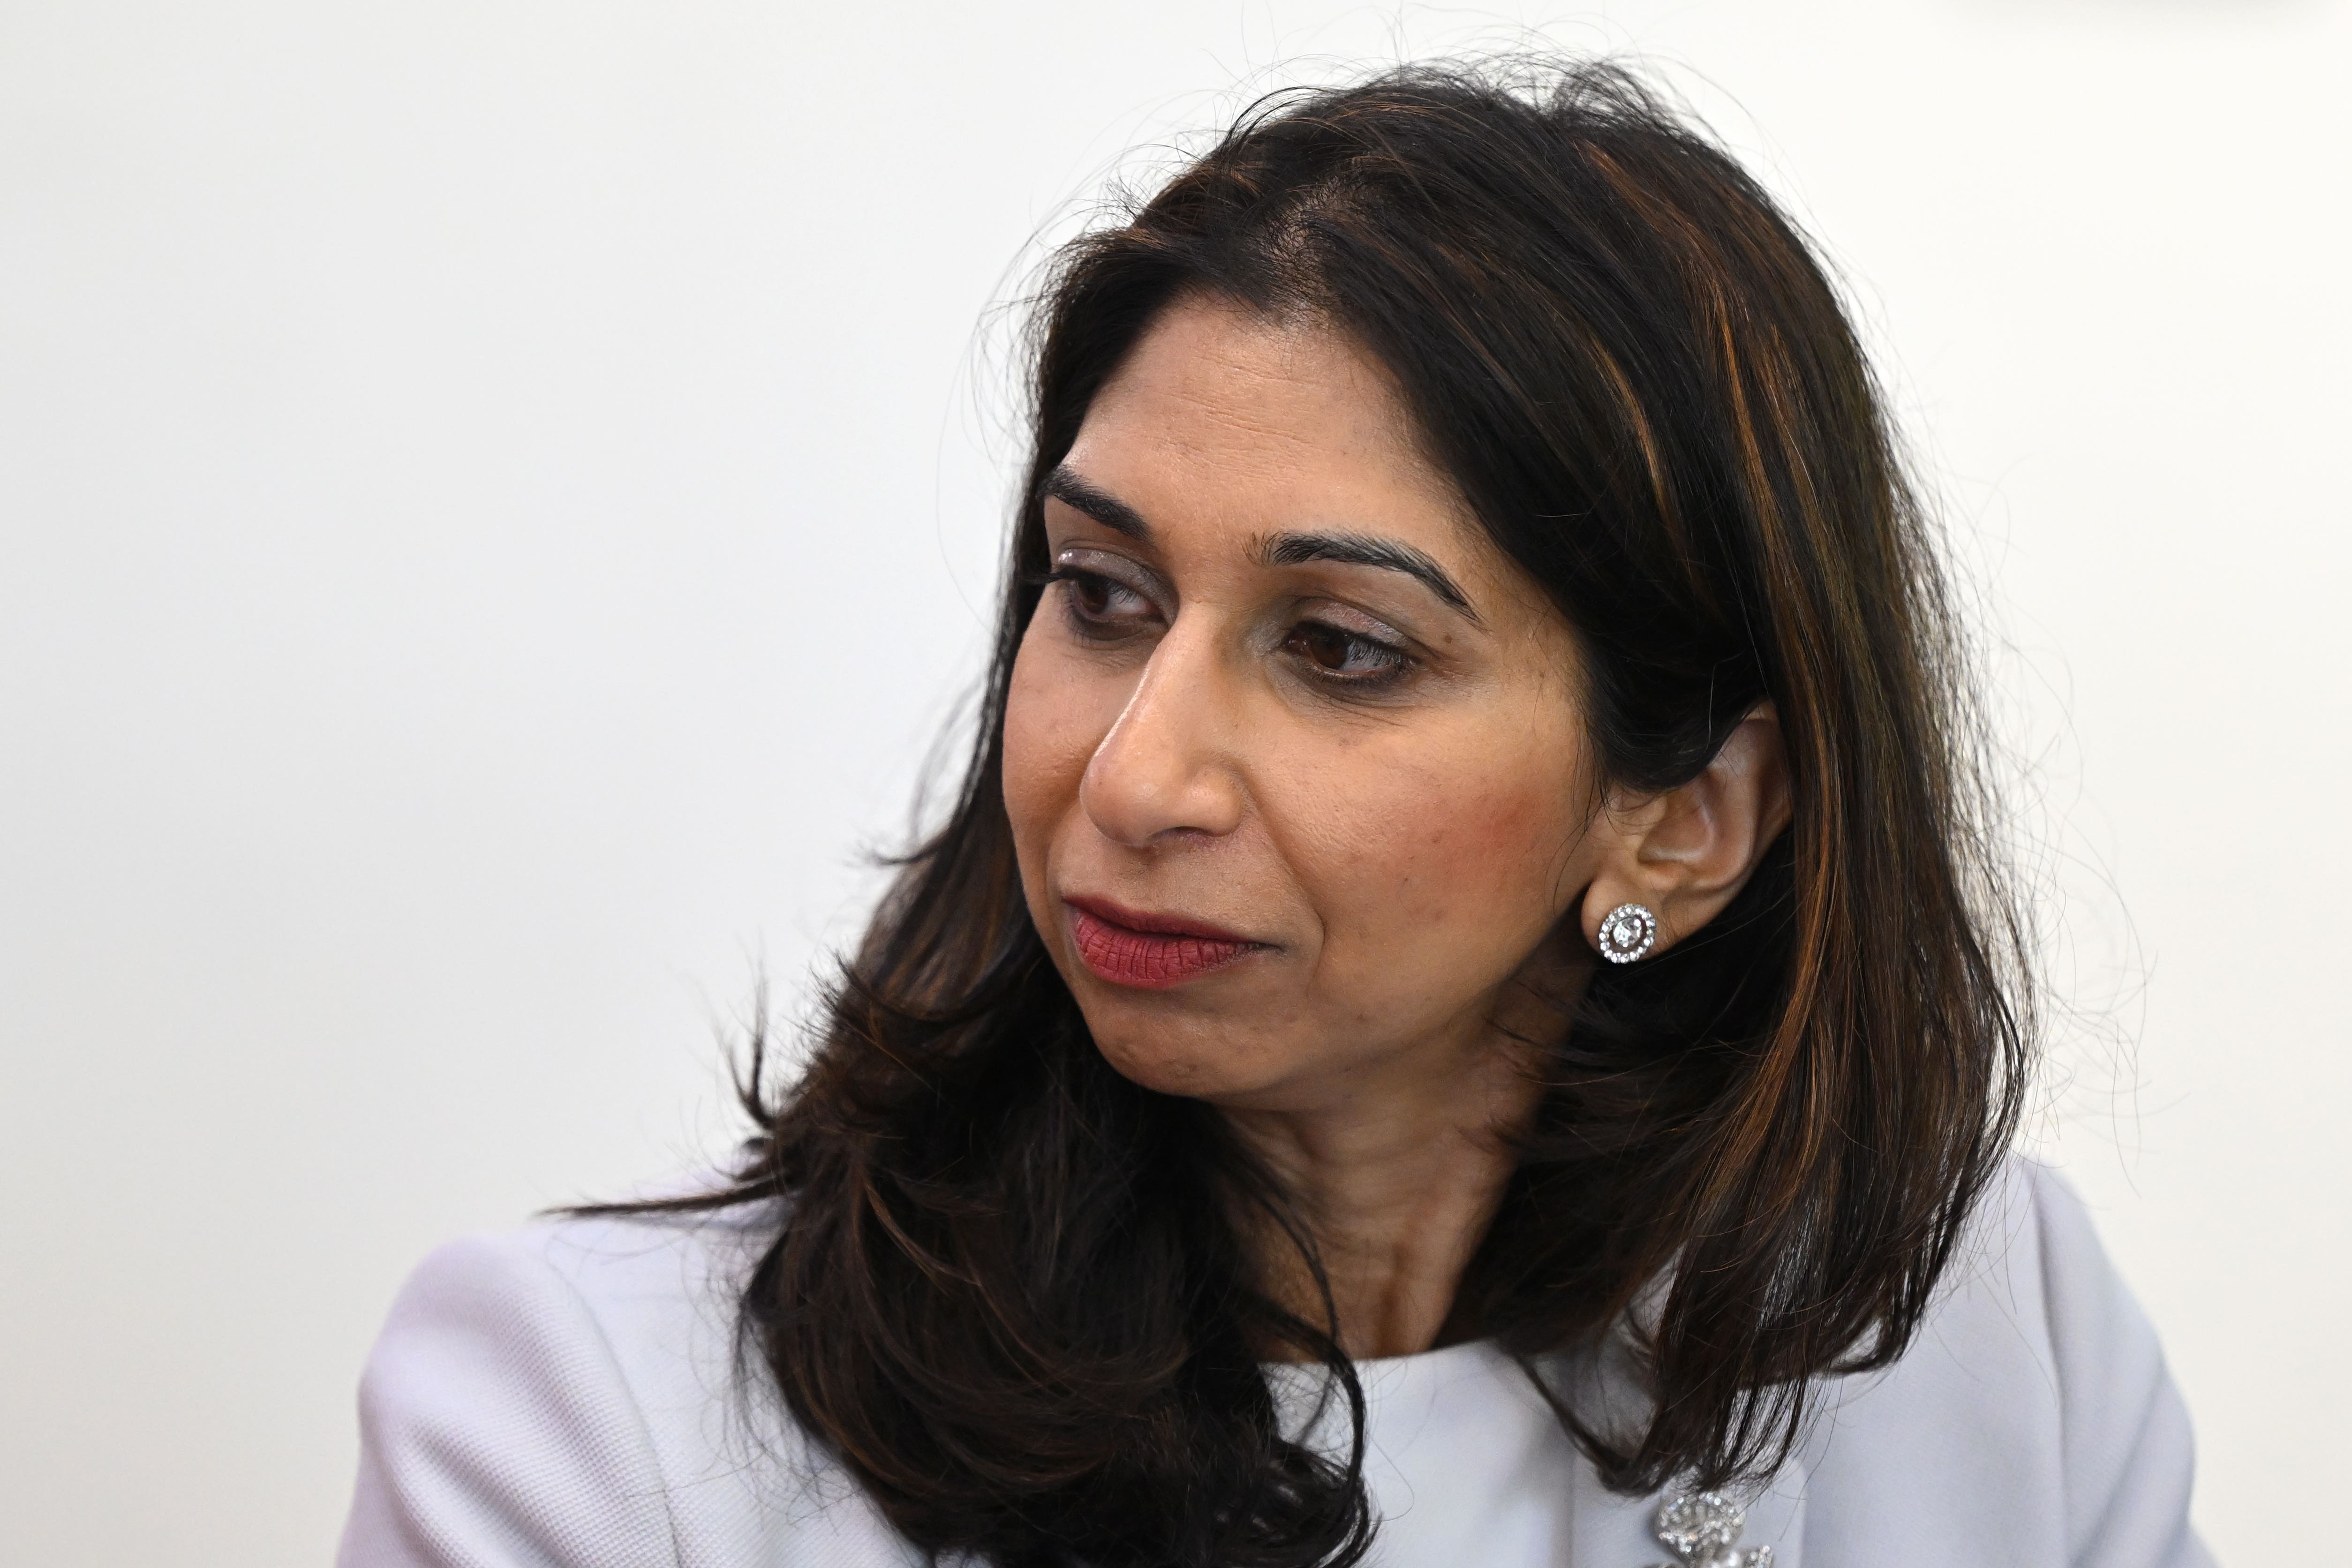 Suella Braverman has been described by one senior Tory as a ‘liability’ to the party